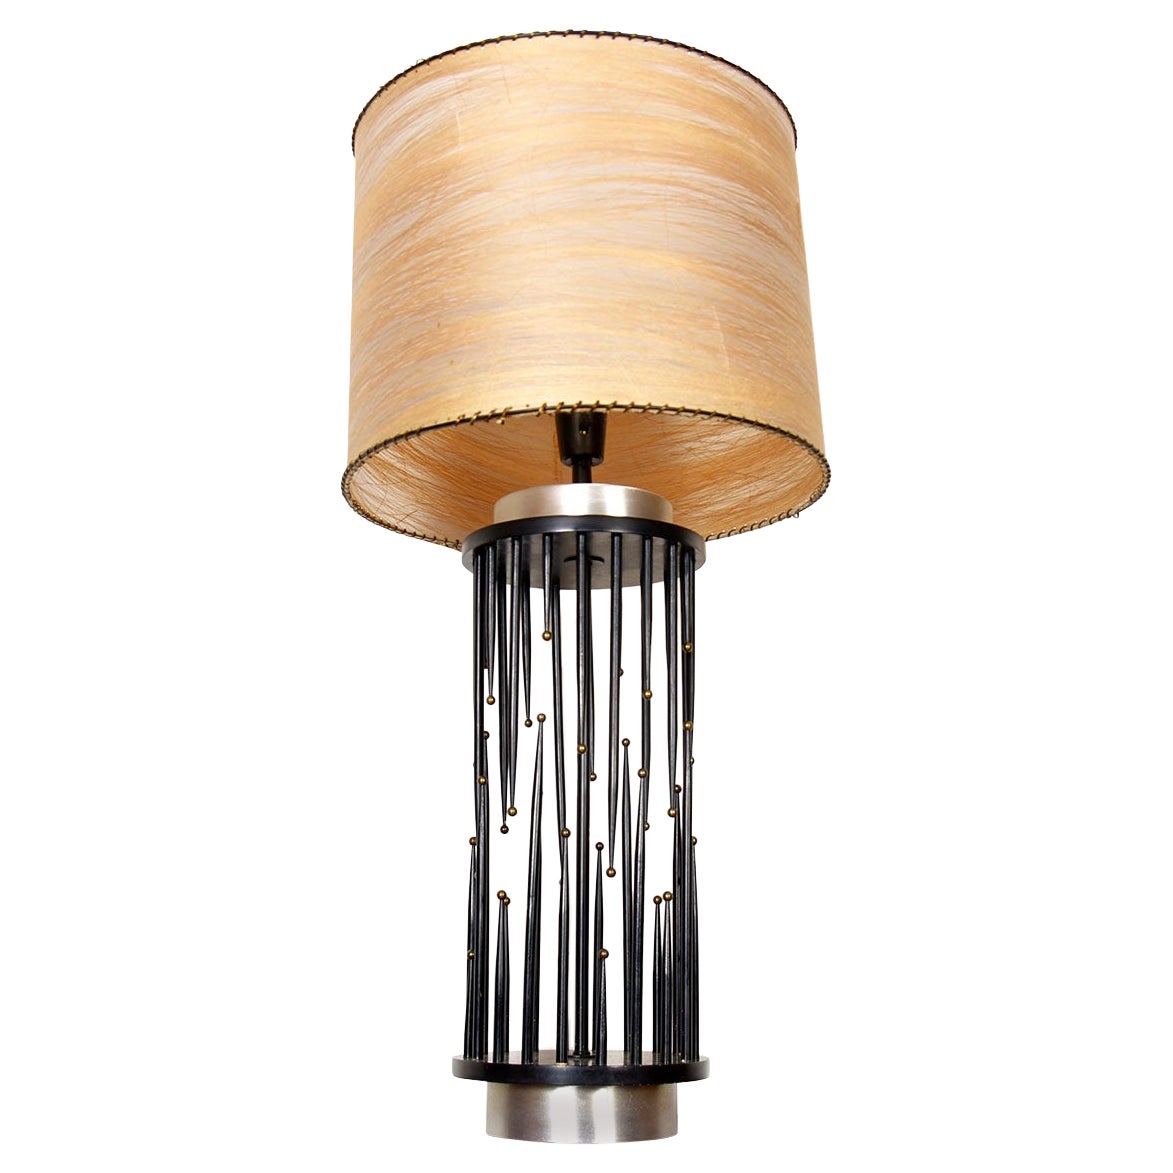 Stalactite Table Lamp in Brutalist Style with Original Matching Finial